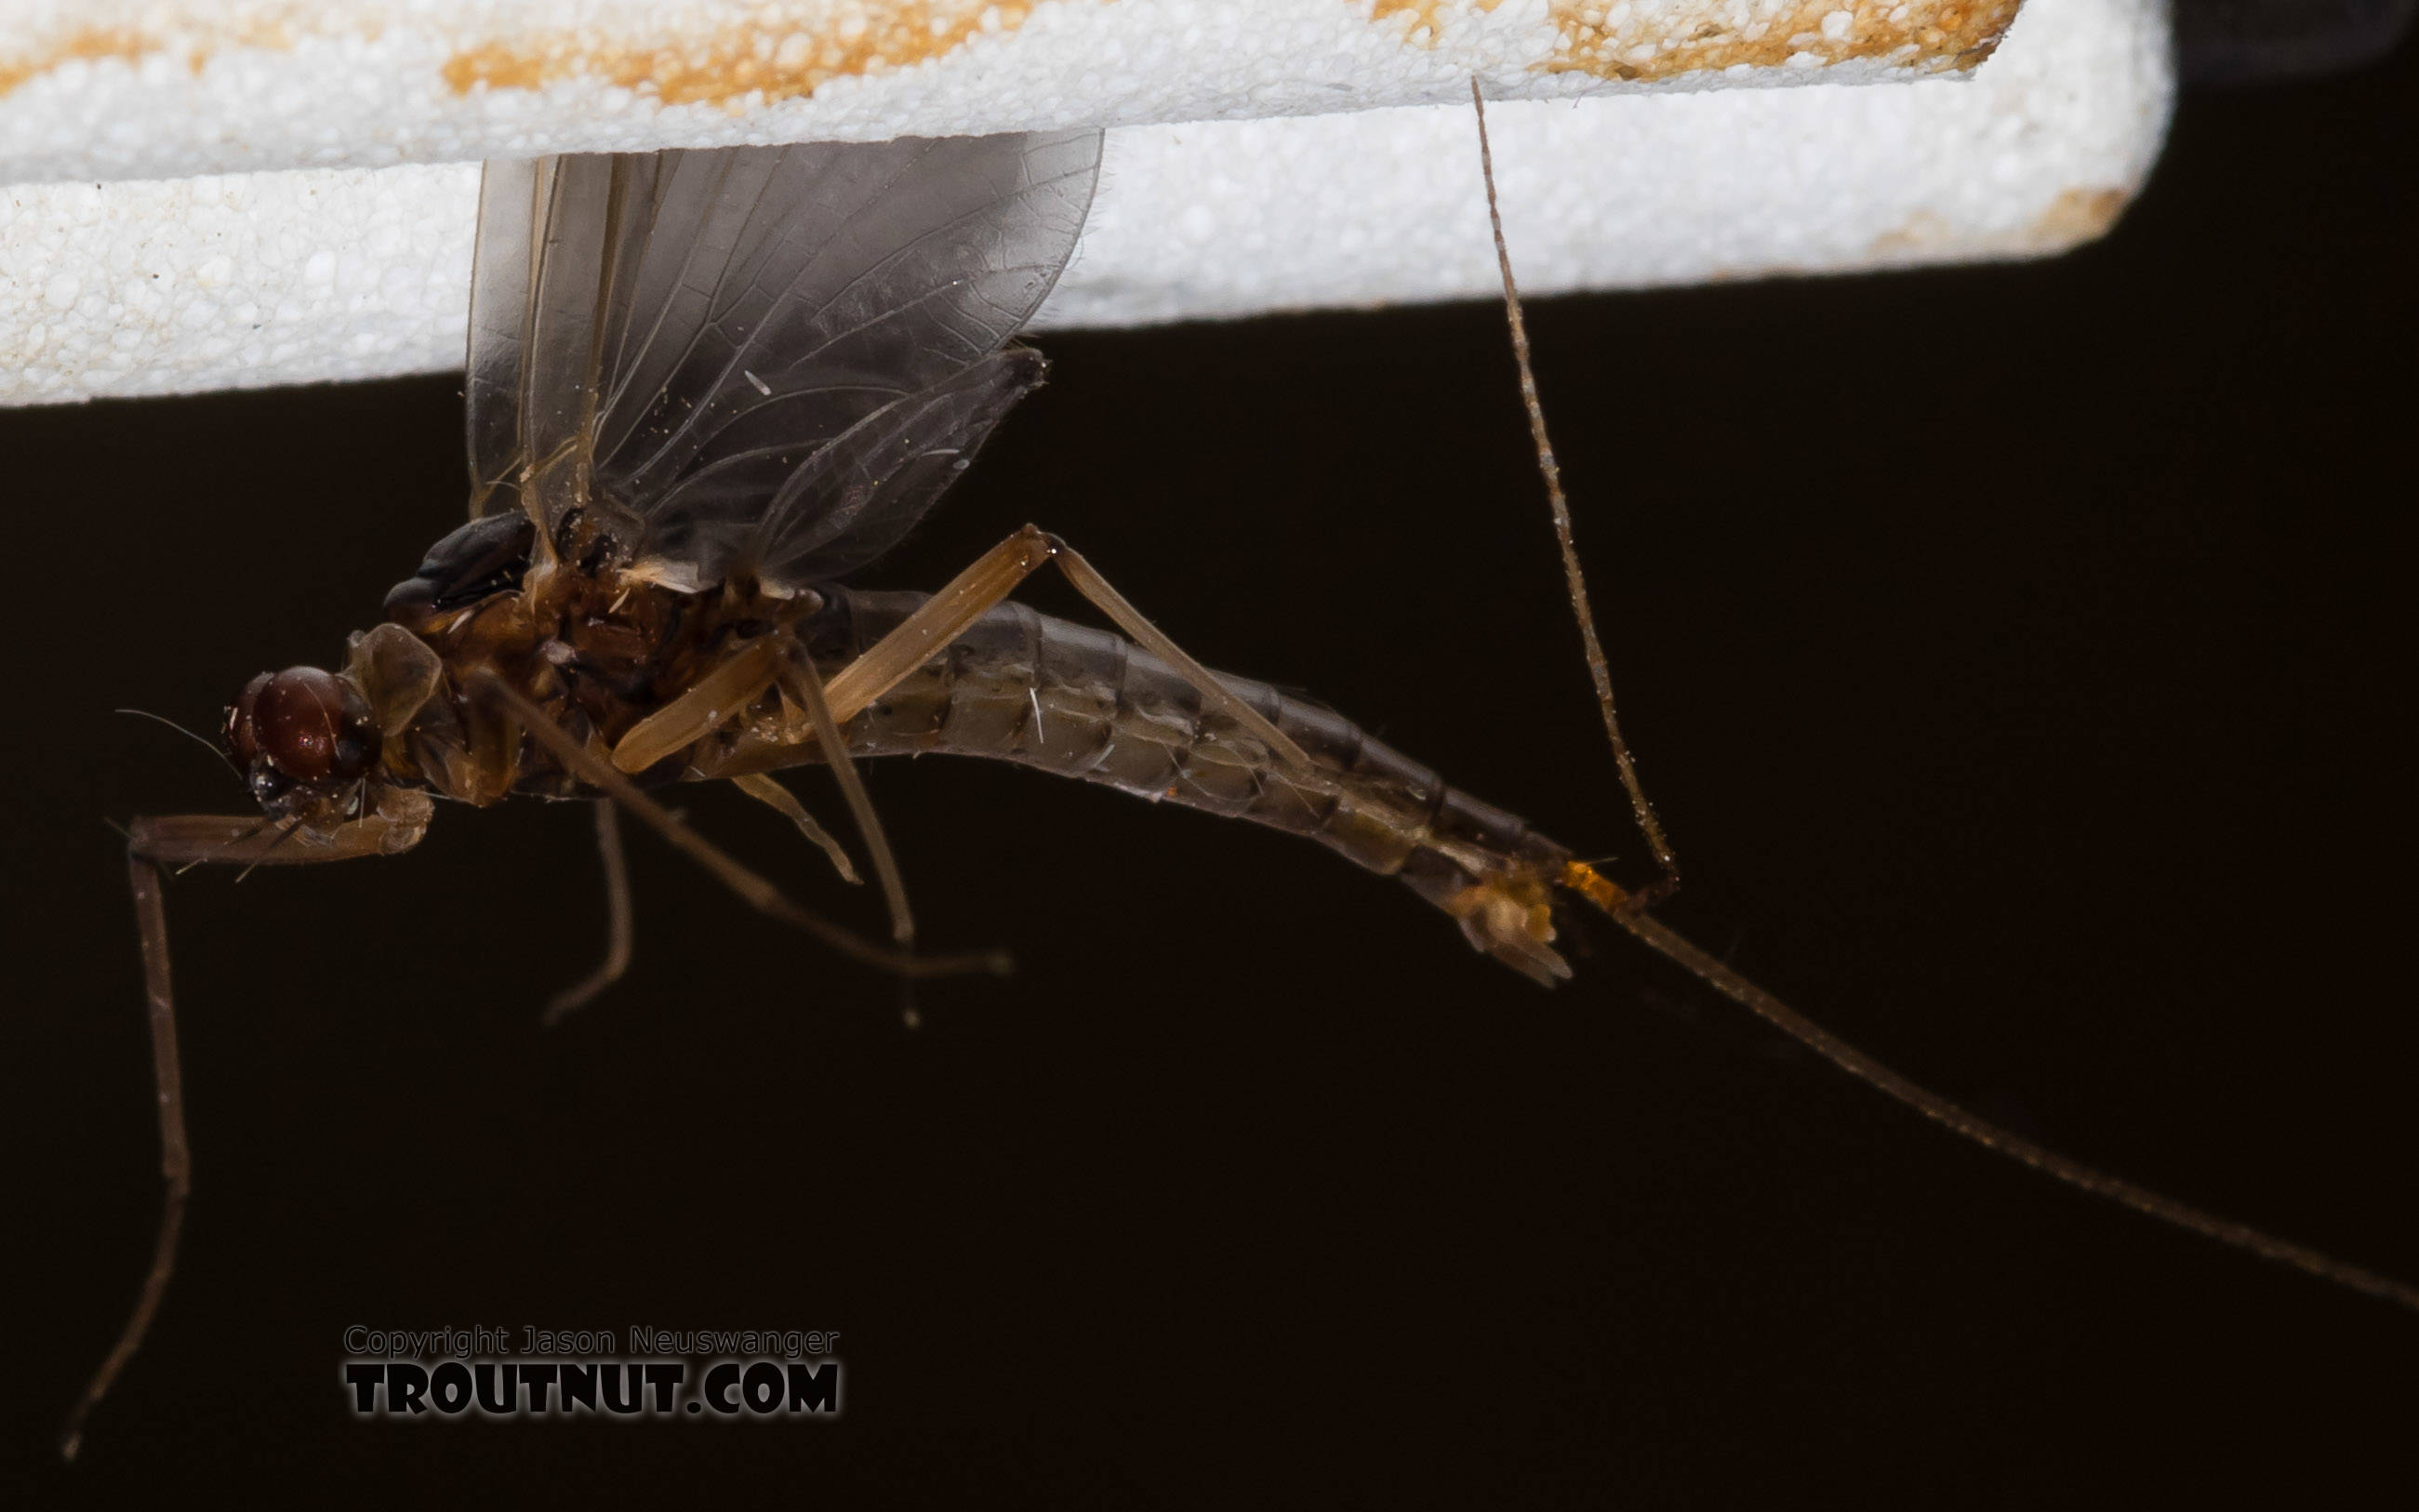 Male Paraleptophlebia (Blue Quills and Mahogany Duns) Mayfly Dun from the Big Hole River in Montana